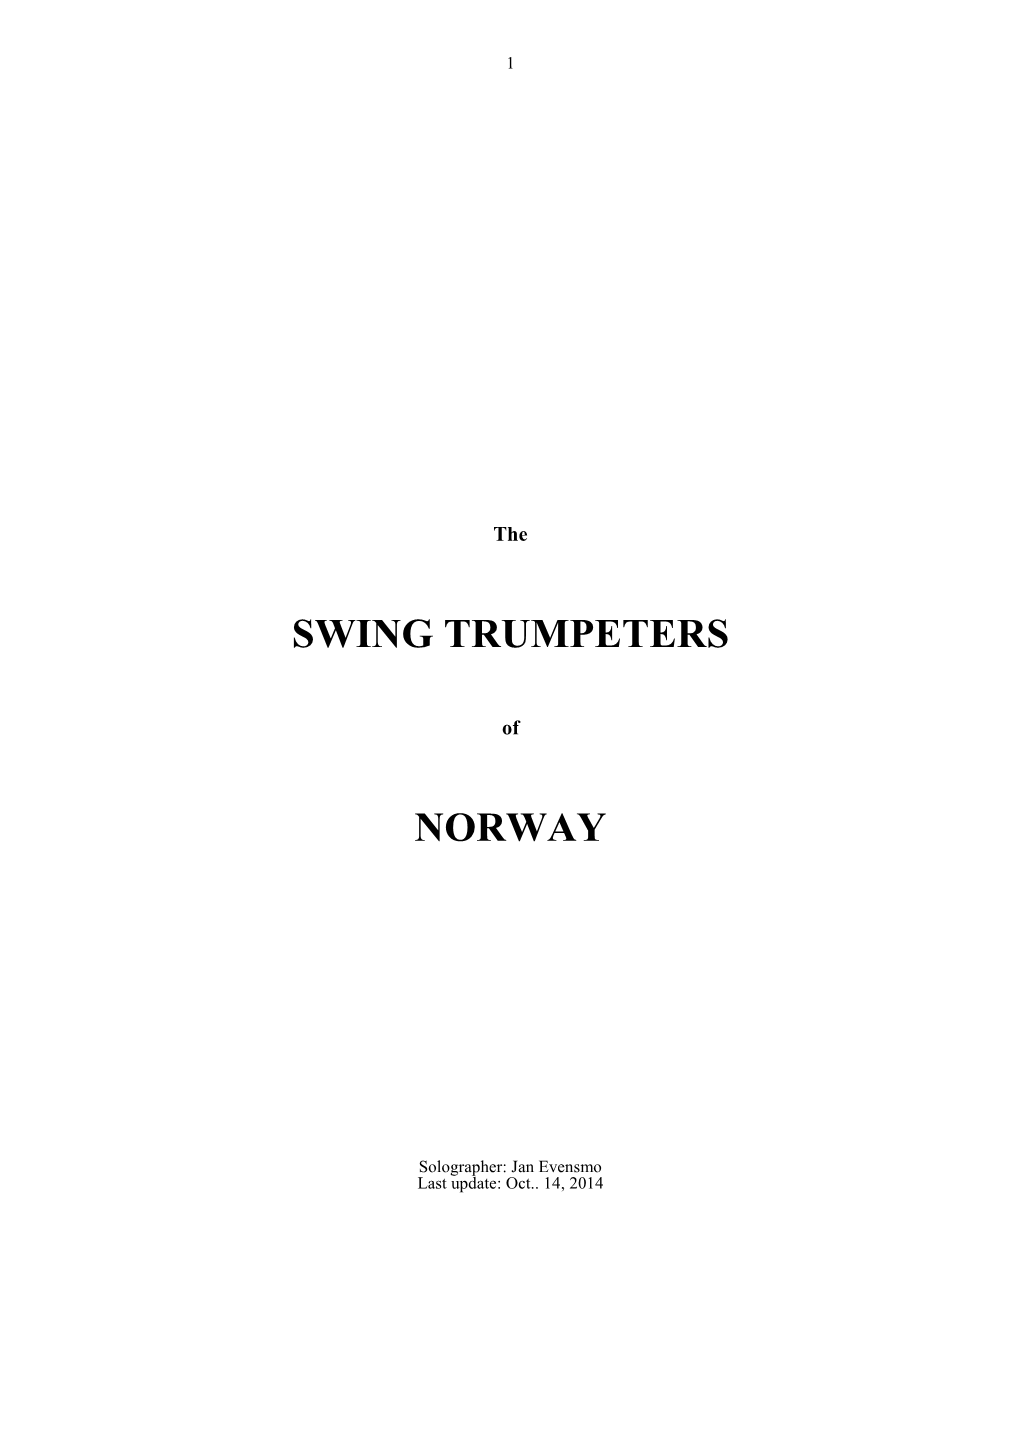 Download the SWING TRUMPETERS of NORWAY